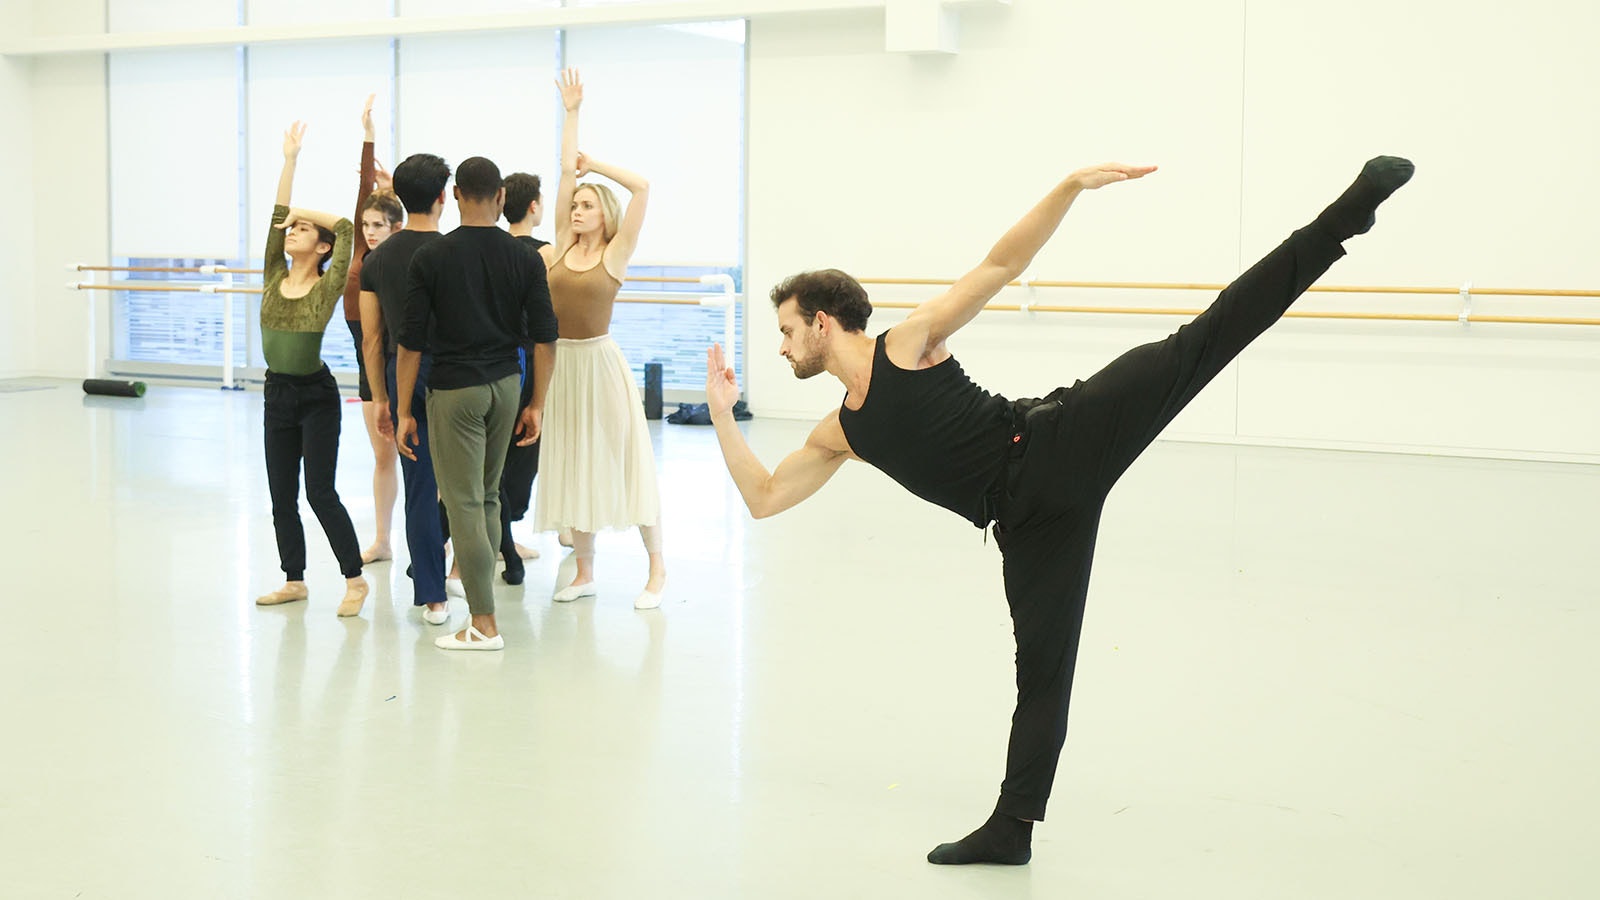 Jack Wolff of the Houston Ballet is the first recipient of the Ucross Foundation's Lauren Anderson Dance Residency.